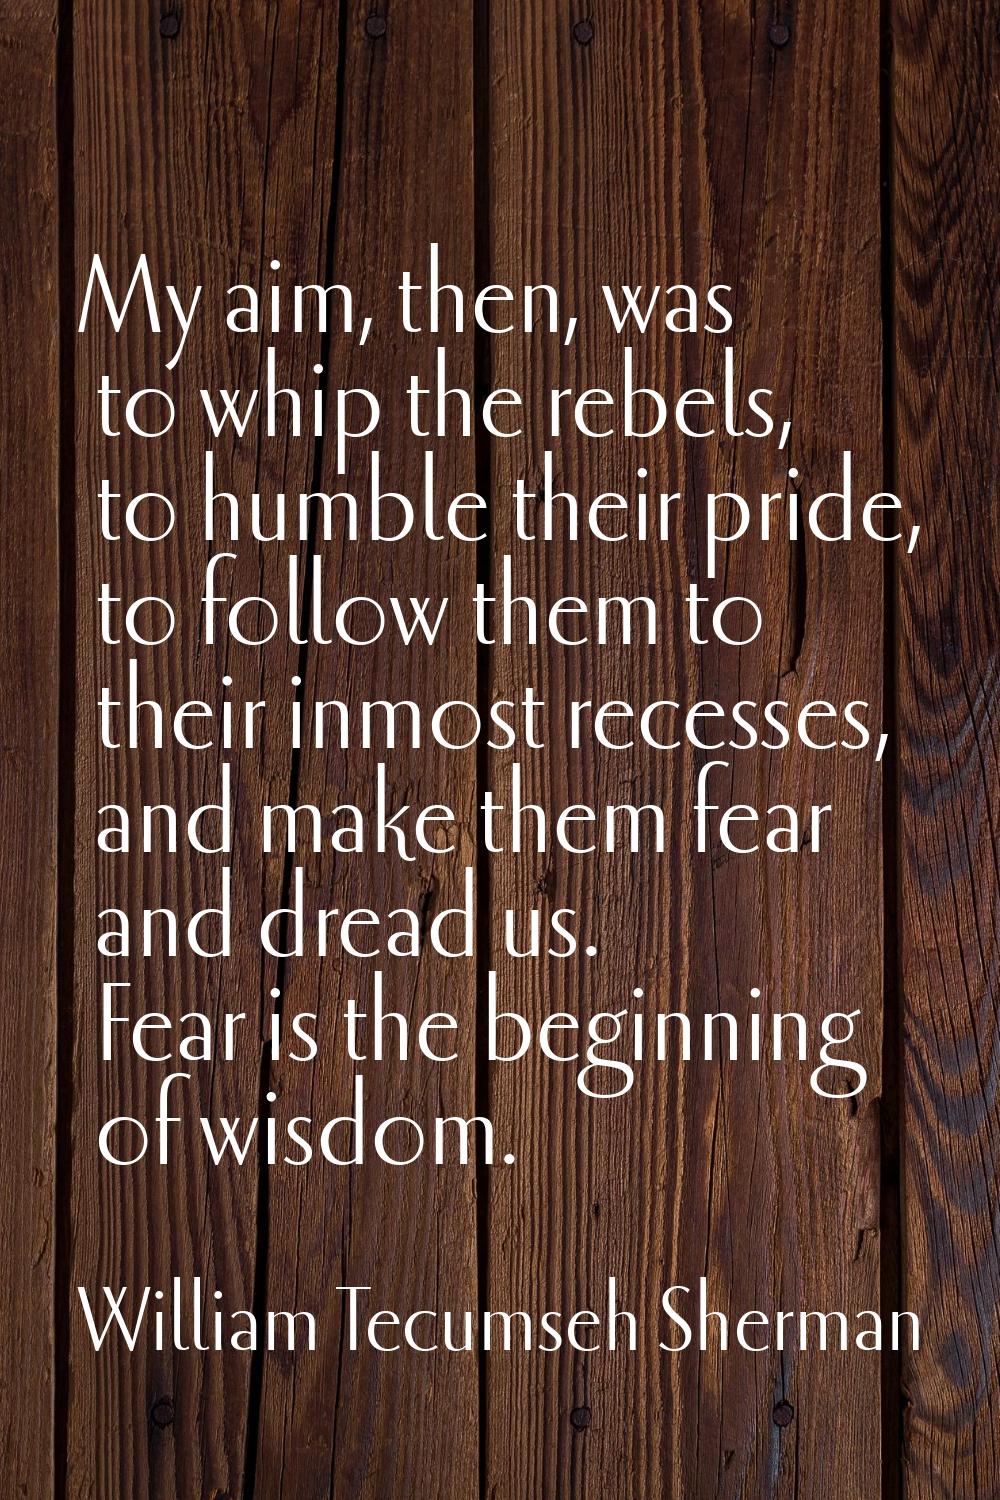 My aim, then, was to whip the rebels, to humble their pride, to follow them to their inmost recesse